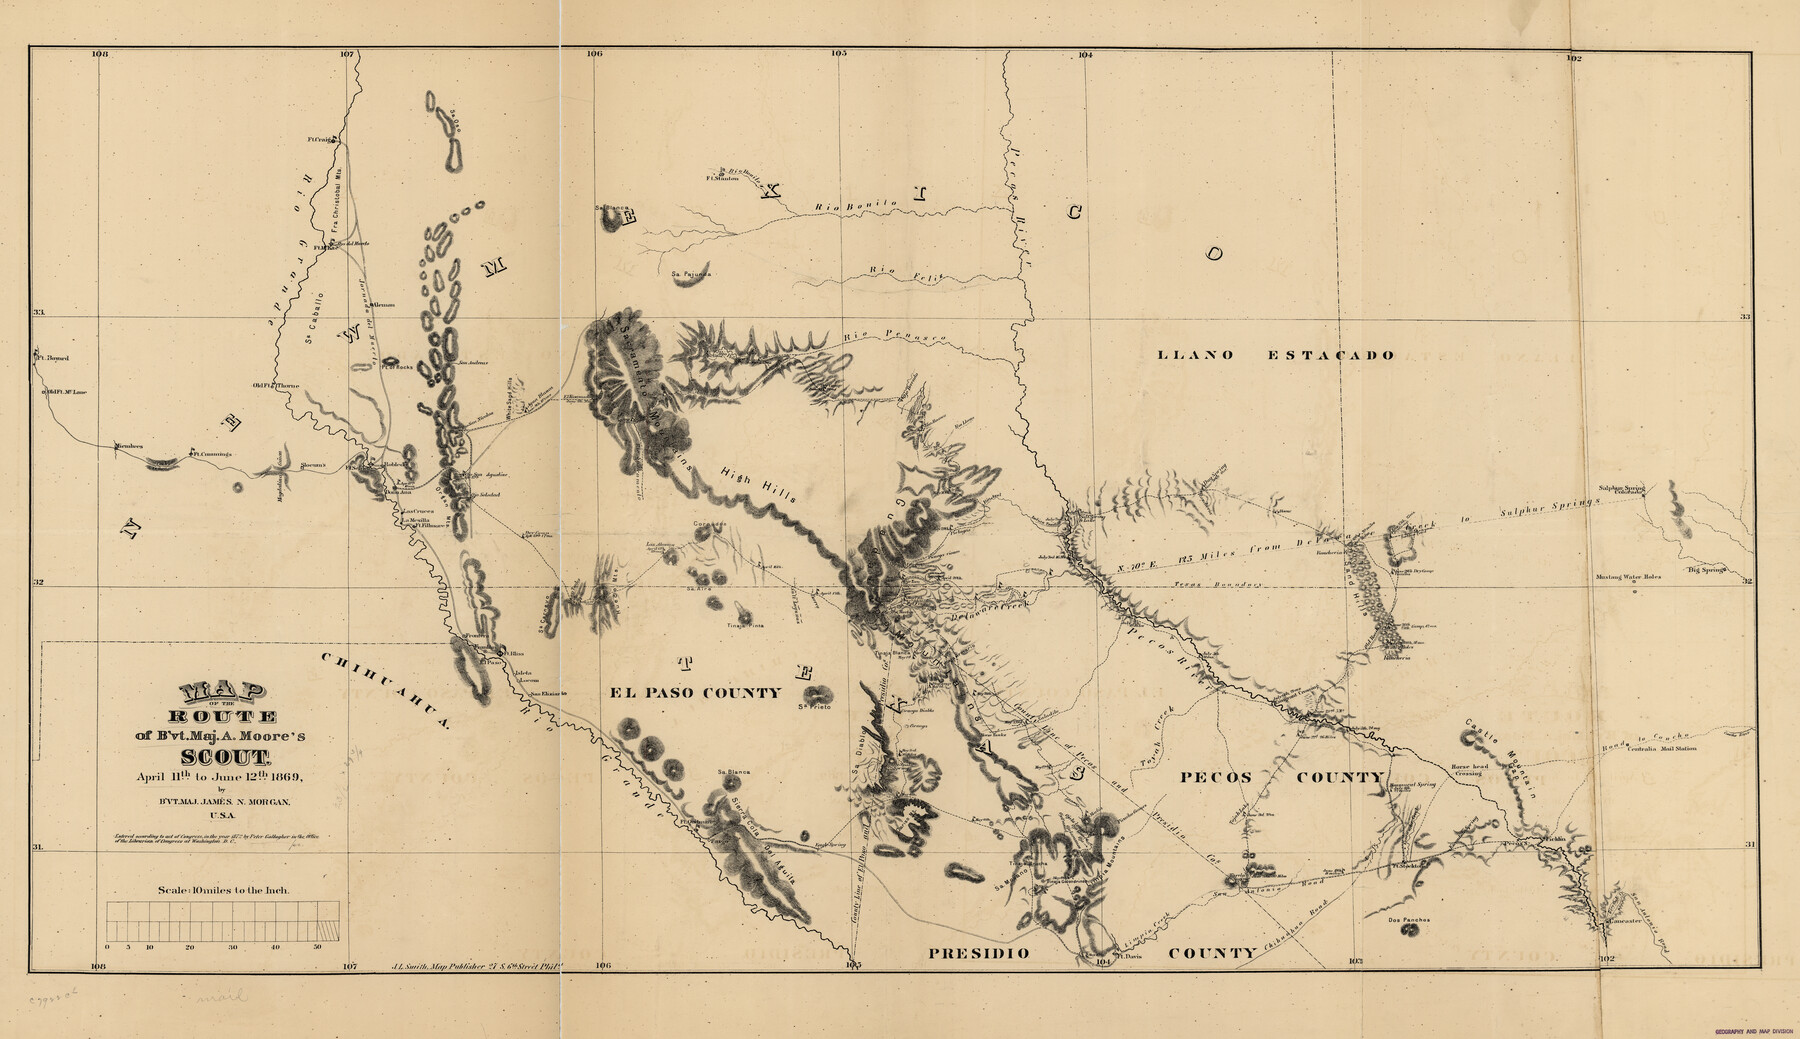 93566, Map of the route of B'vt. Maj. A. Moore's scout, April 11th to June 12th 1869, Library of Congress